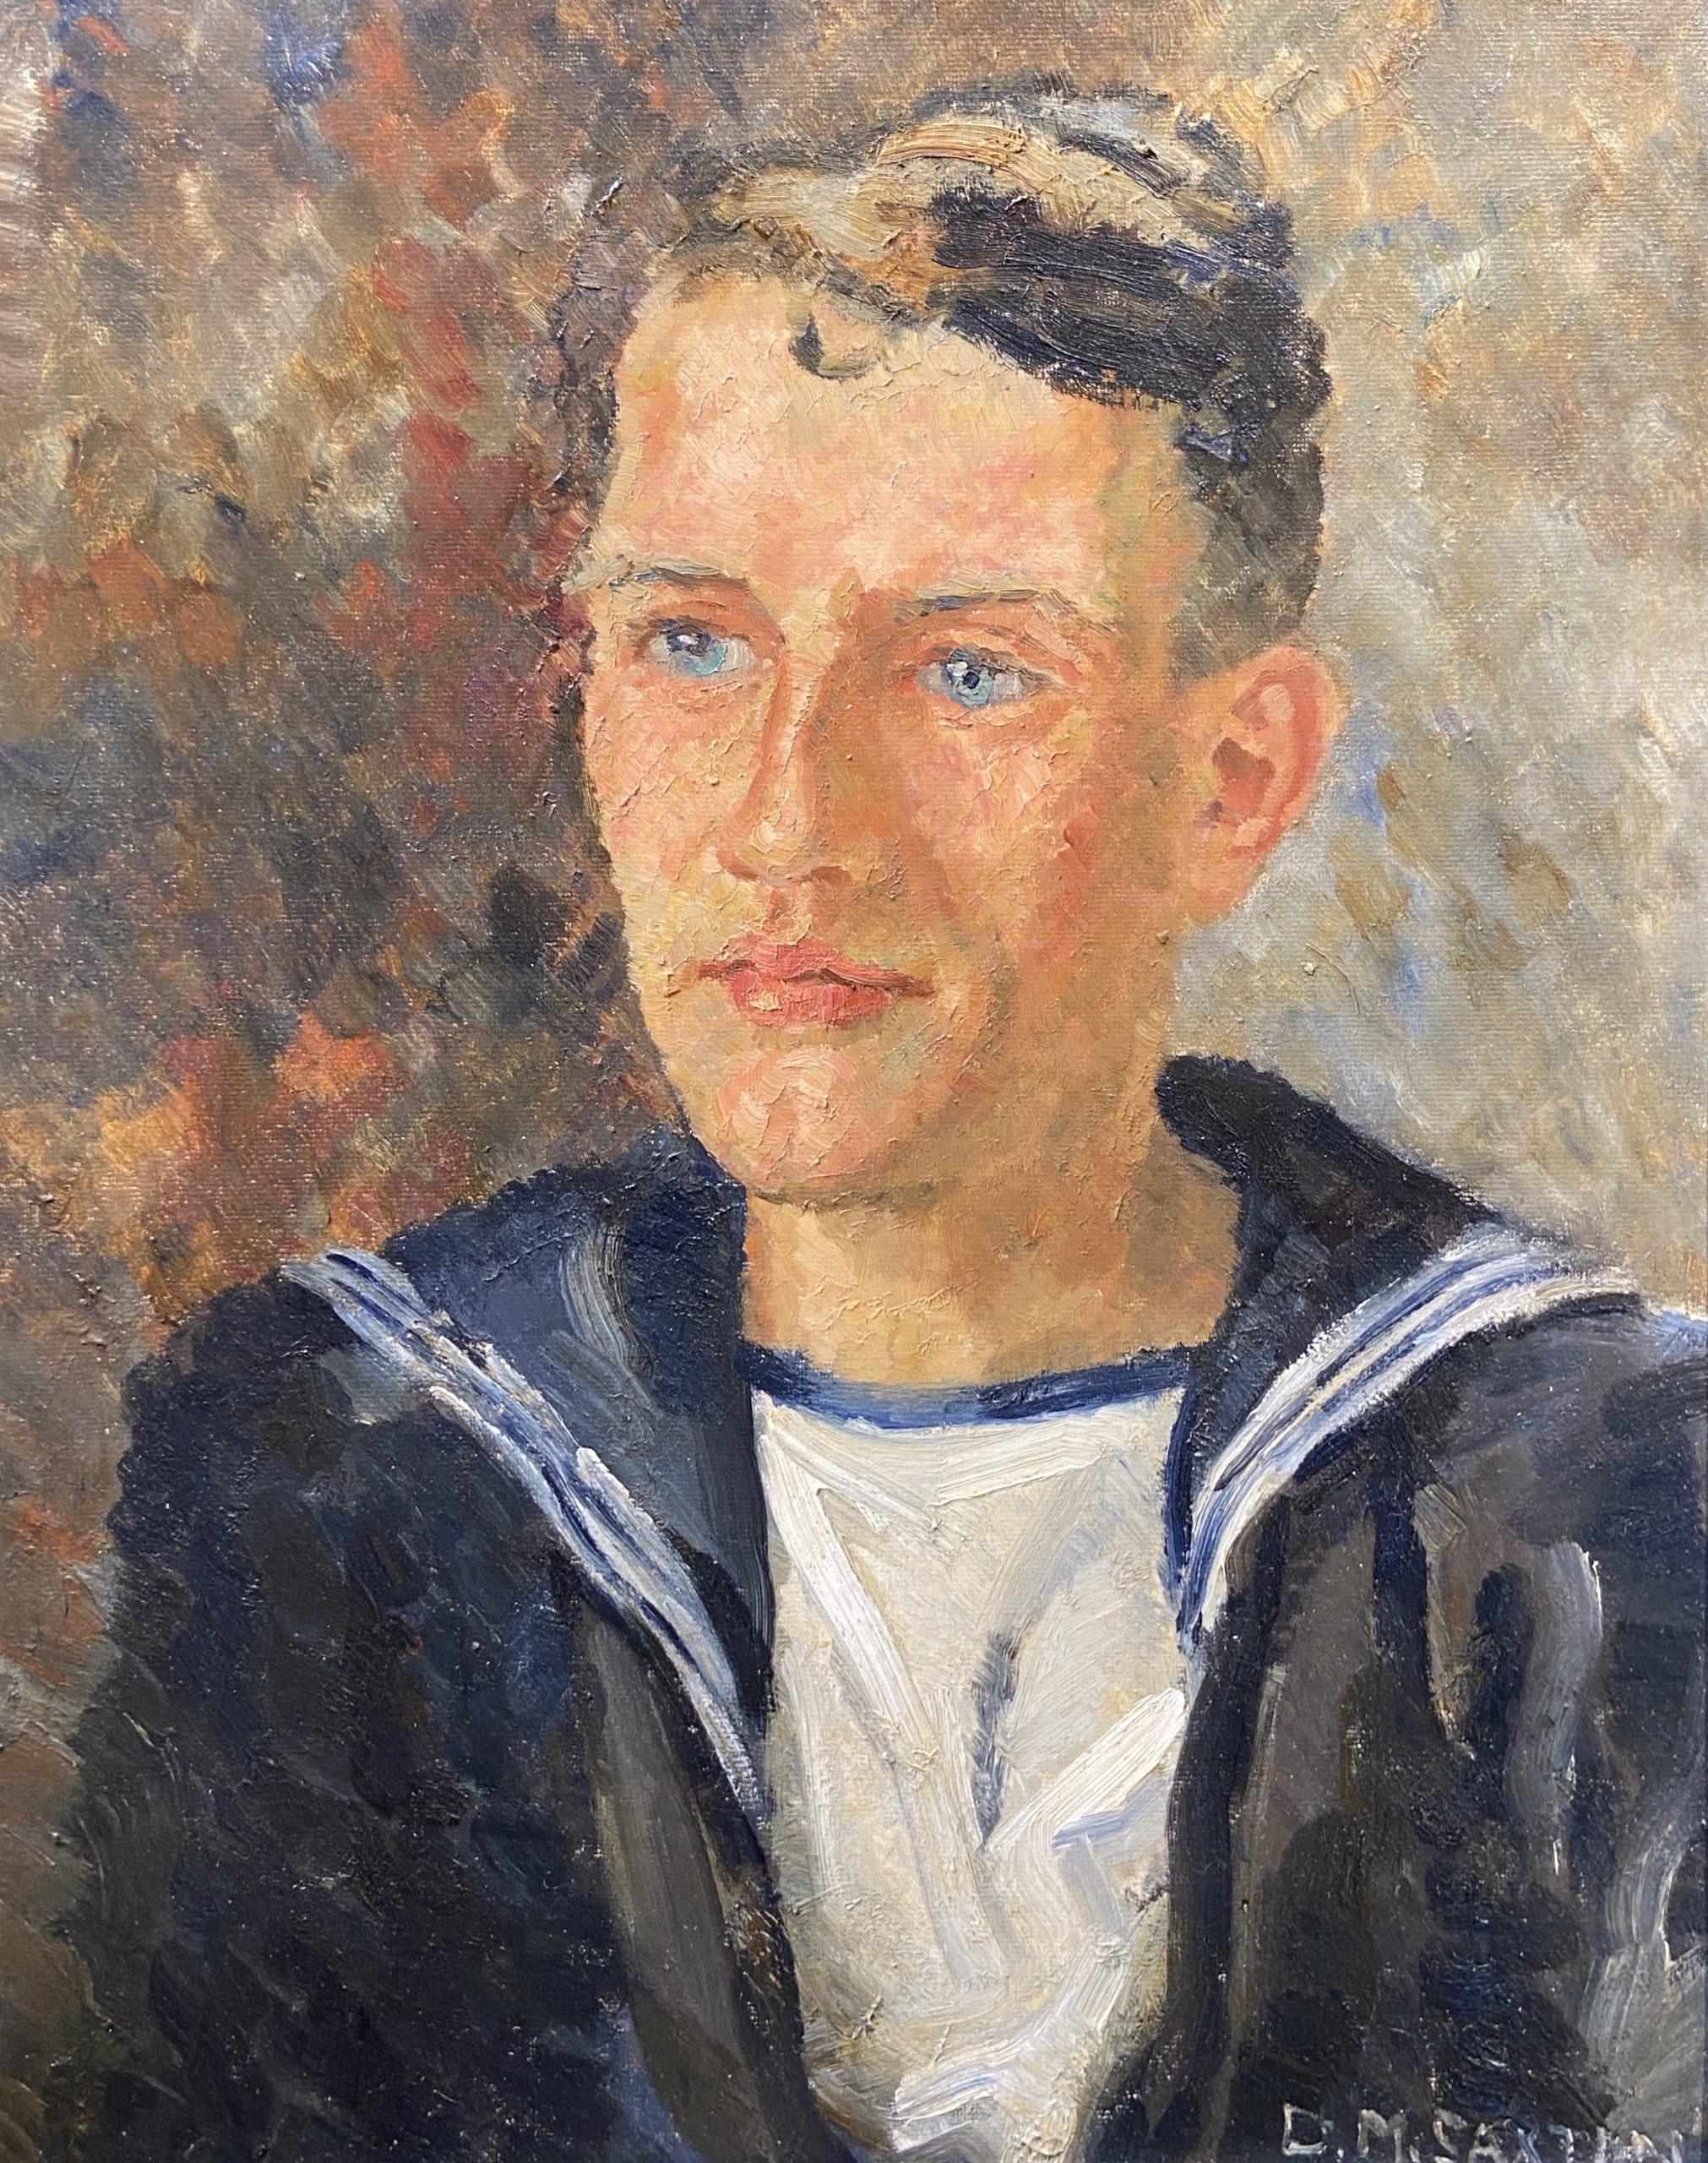 L. M. Saxton Portrait Painting - Portrait of a Sailor, Oil on Board, 20th Century Painting, Signed